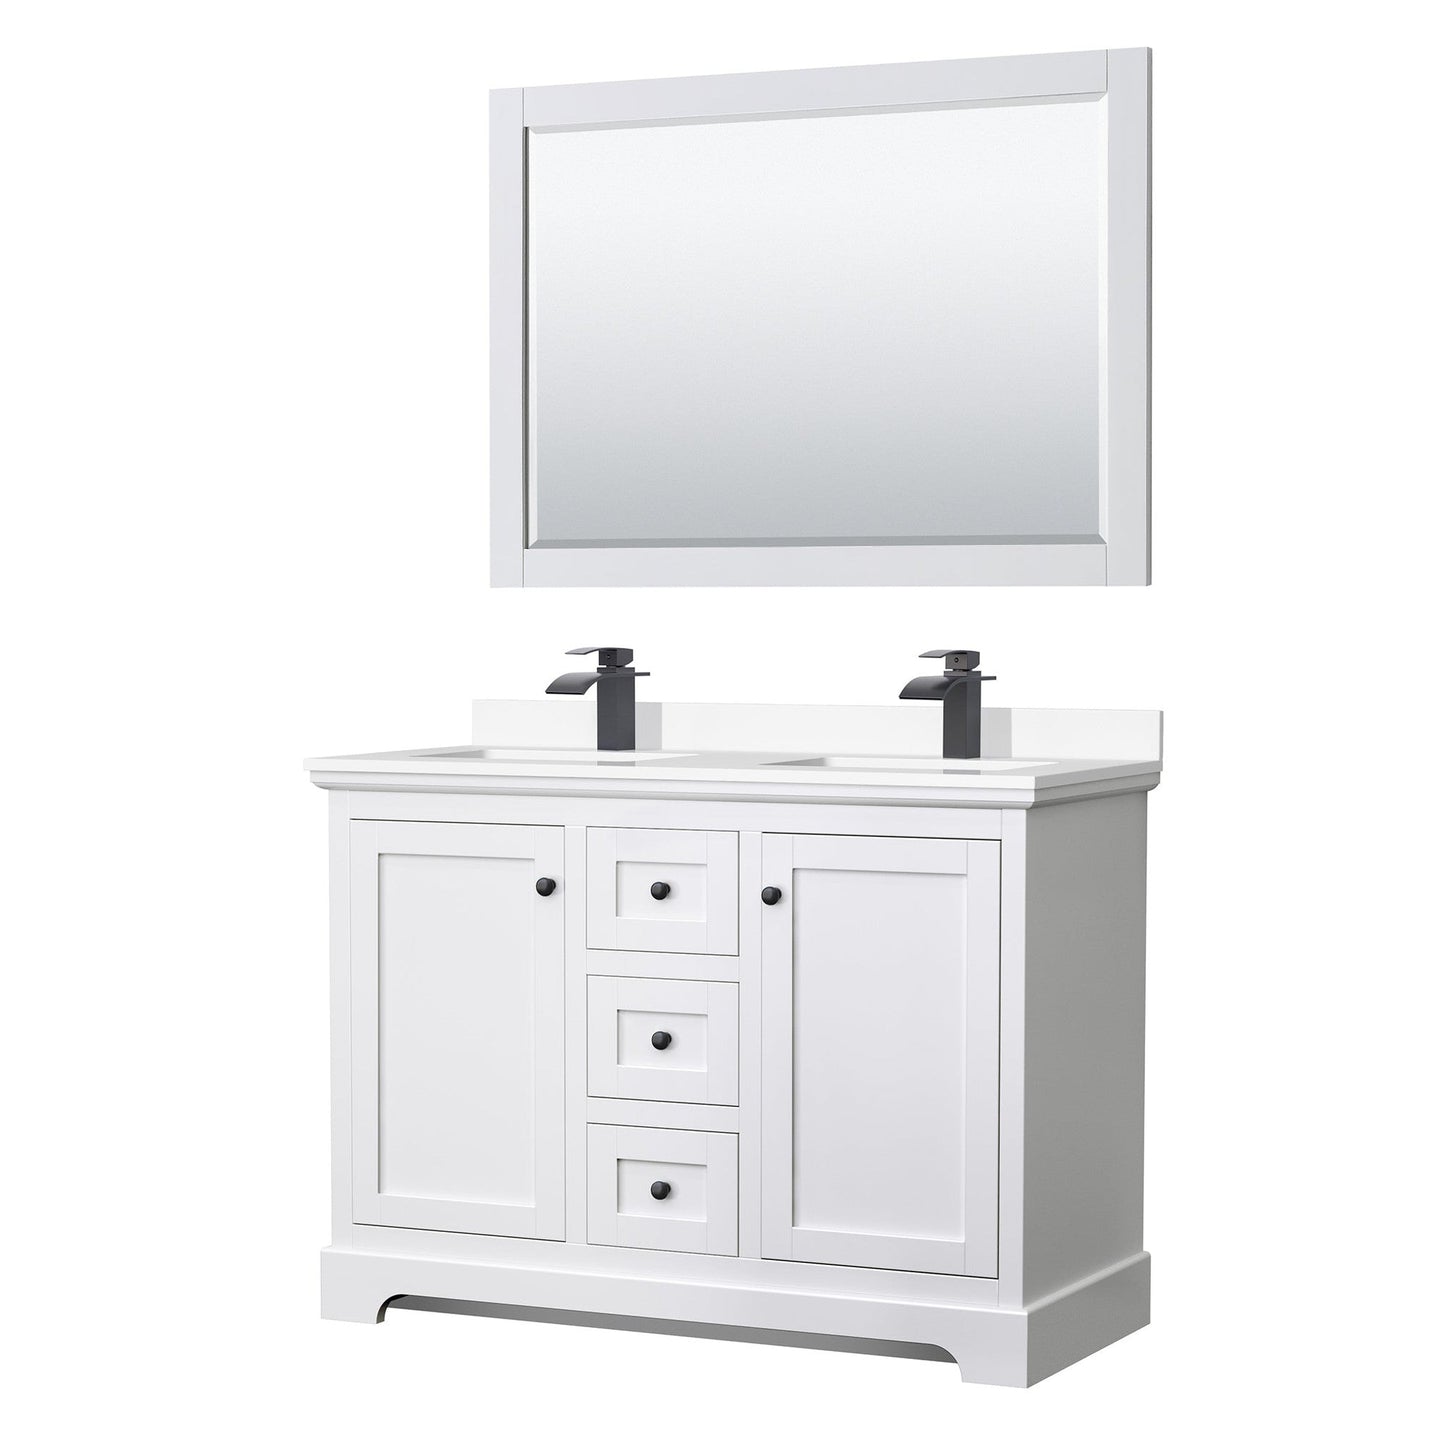 Avery 48" Double Bathroom Vanity in White, White Cultured Marble Countertop, Undermount Square Sinks, Matte Black Trim, 46" Mirror